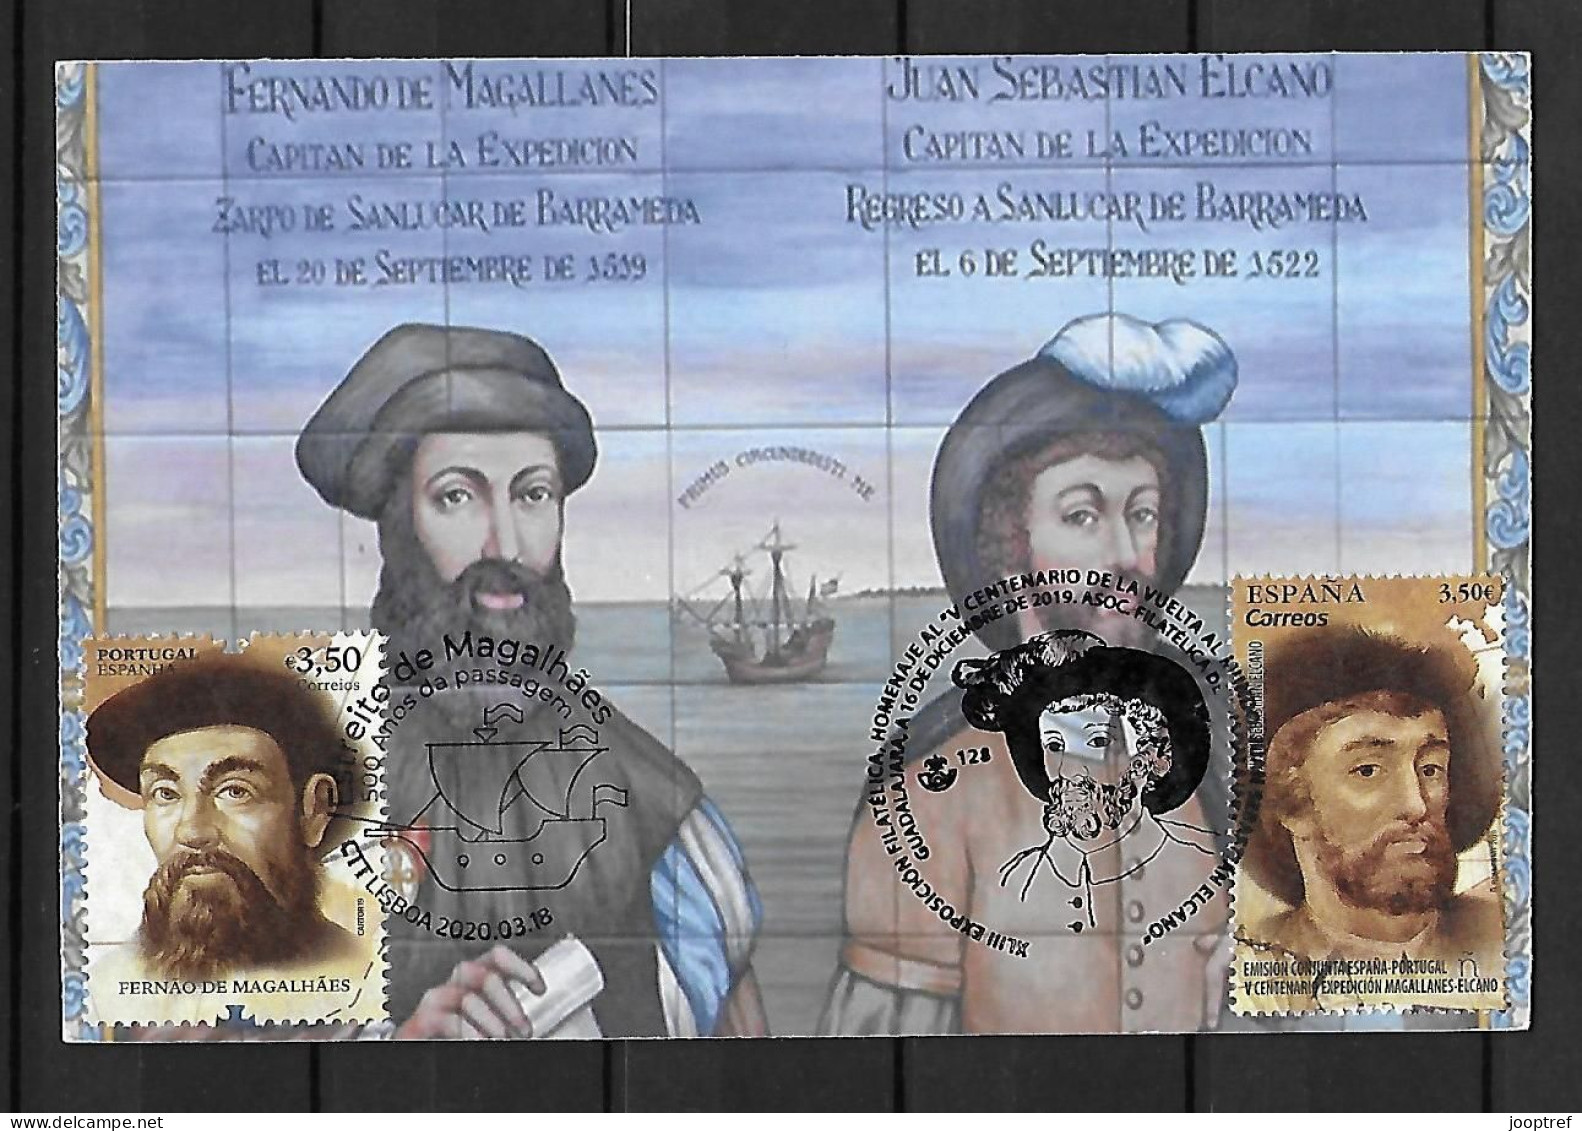 2019 Joint Portugal And Spain, MIXED FDC MAXIMUM CARD WITH BOTH STAMPS: 500 Years Magellan-Elcano Expedition - Emissions Communes